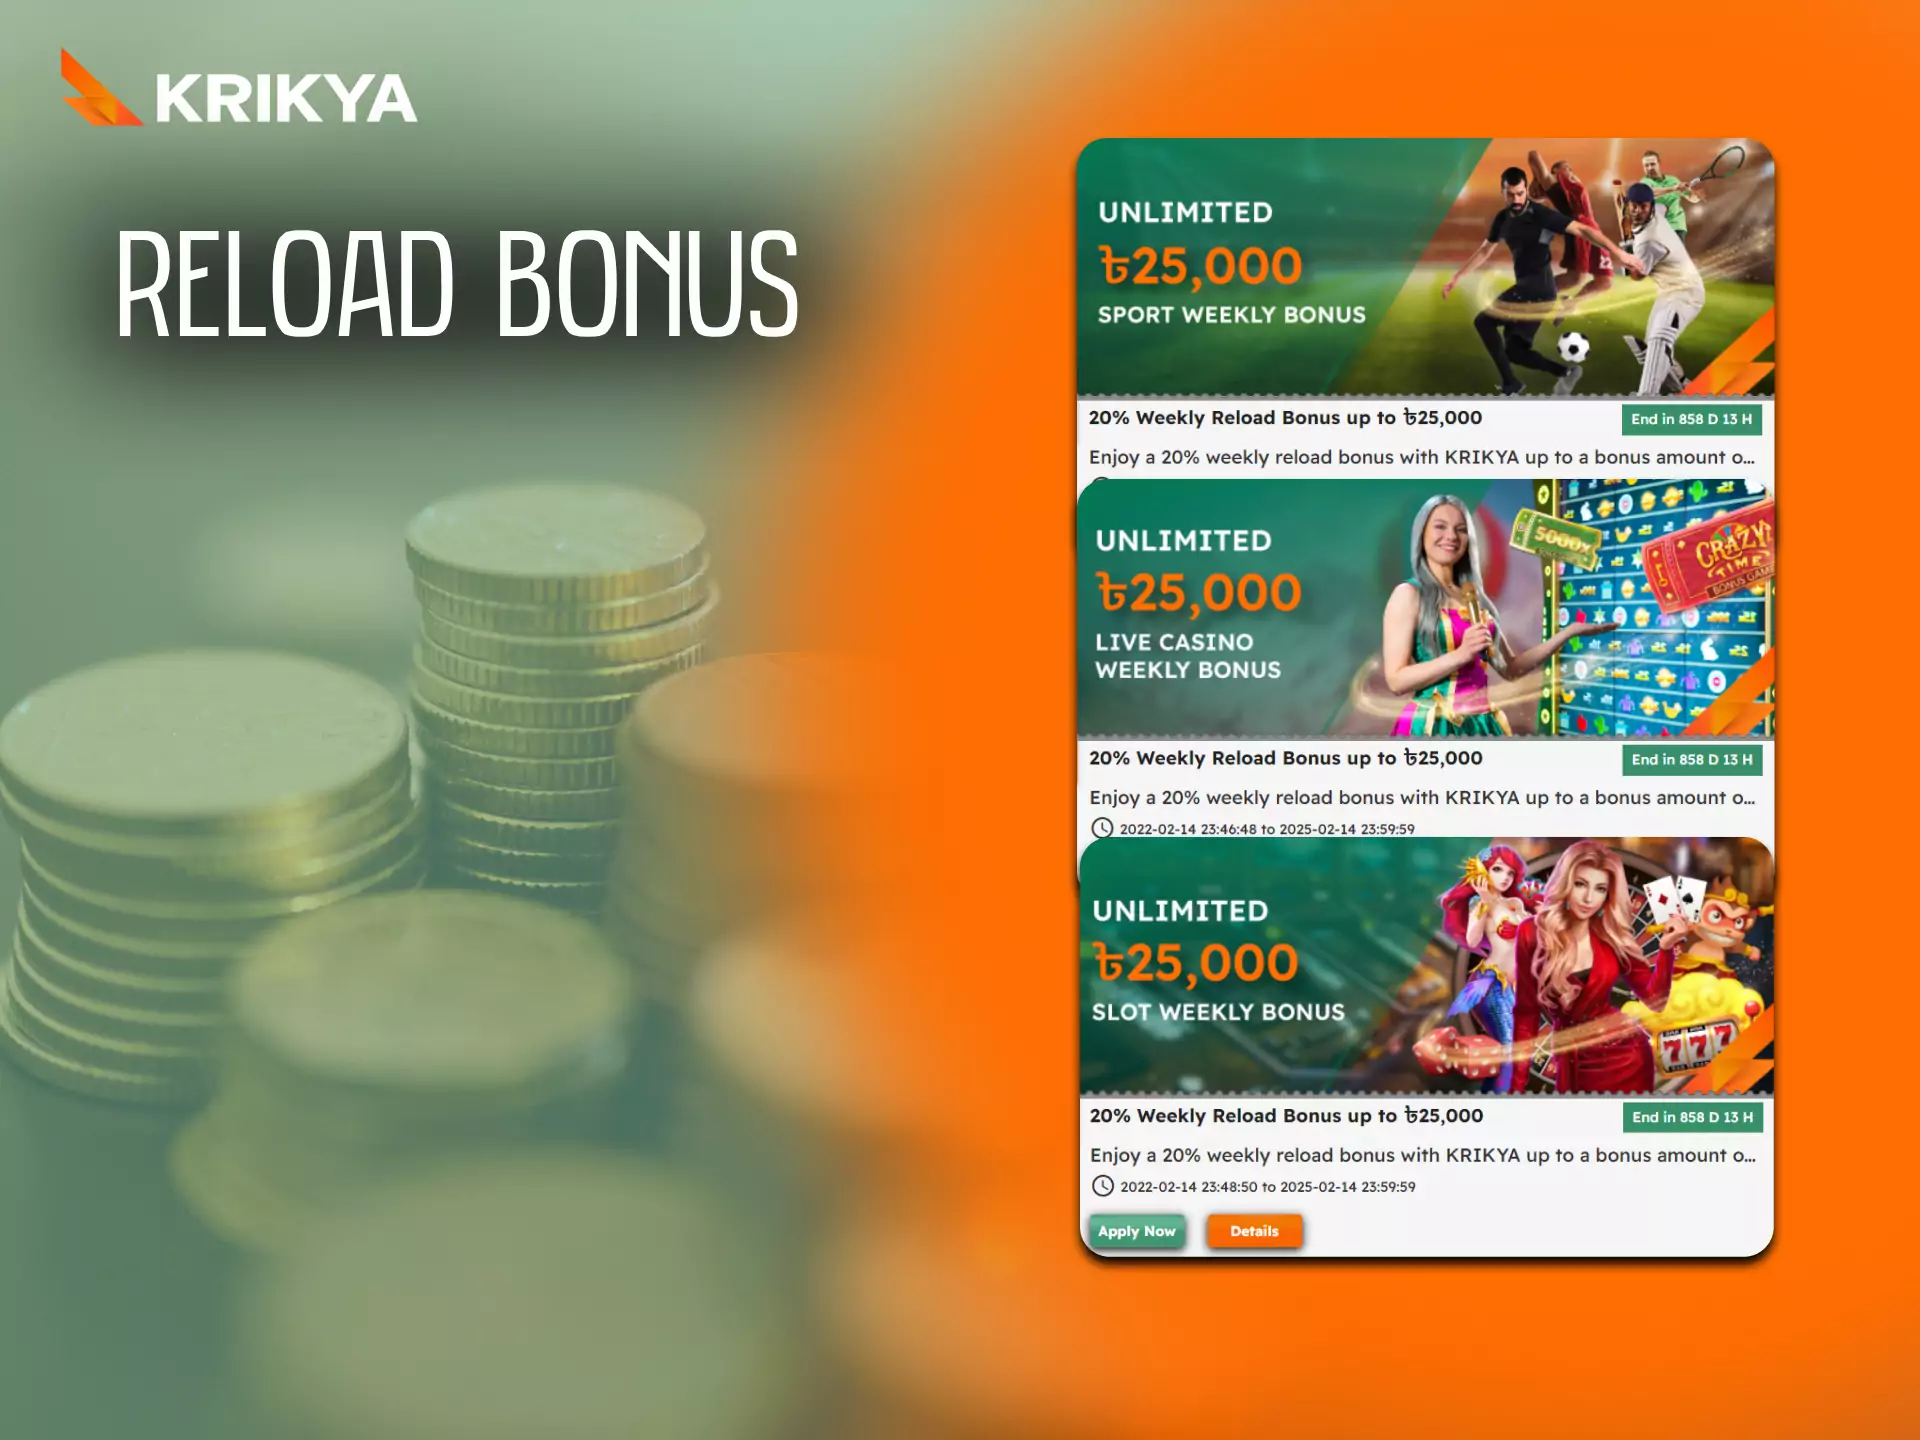 There is a reload bonus in Krikya, join us and have fun with the game.